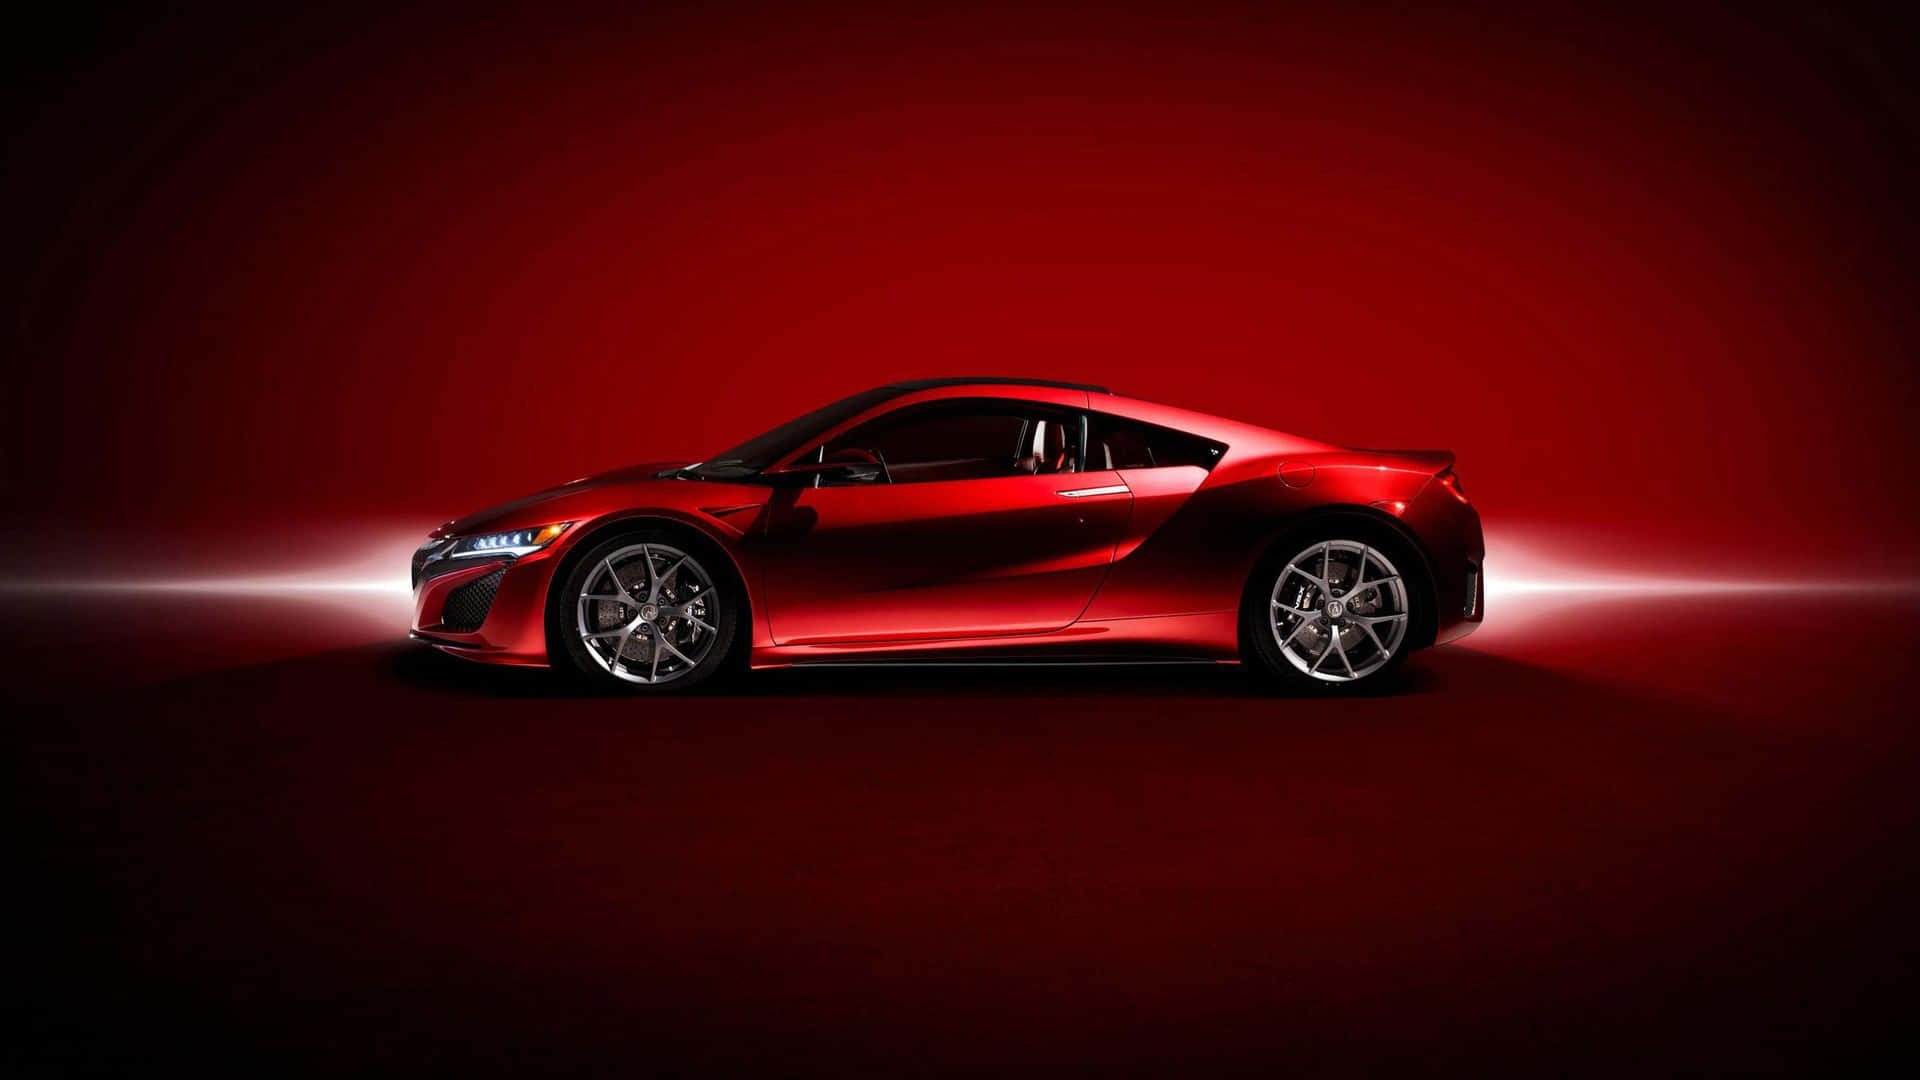 Your Glowing Acura NSX Wallpaper Is Here